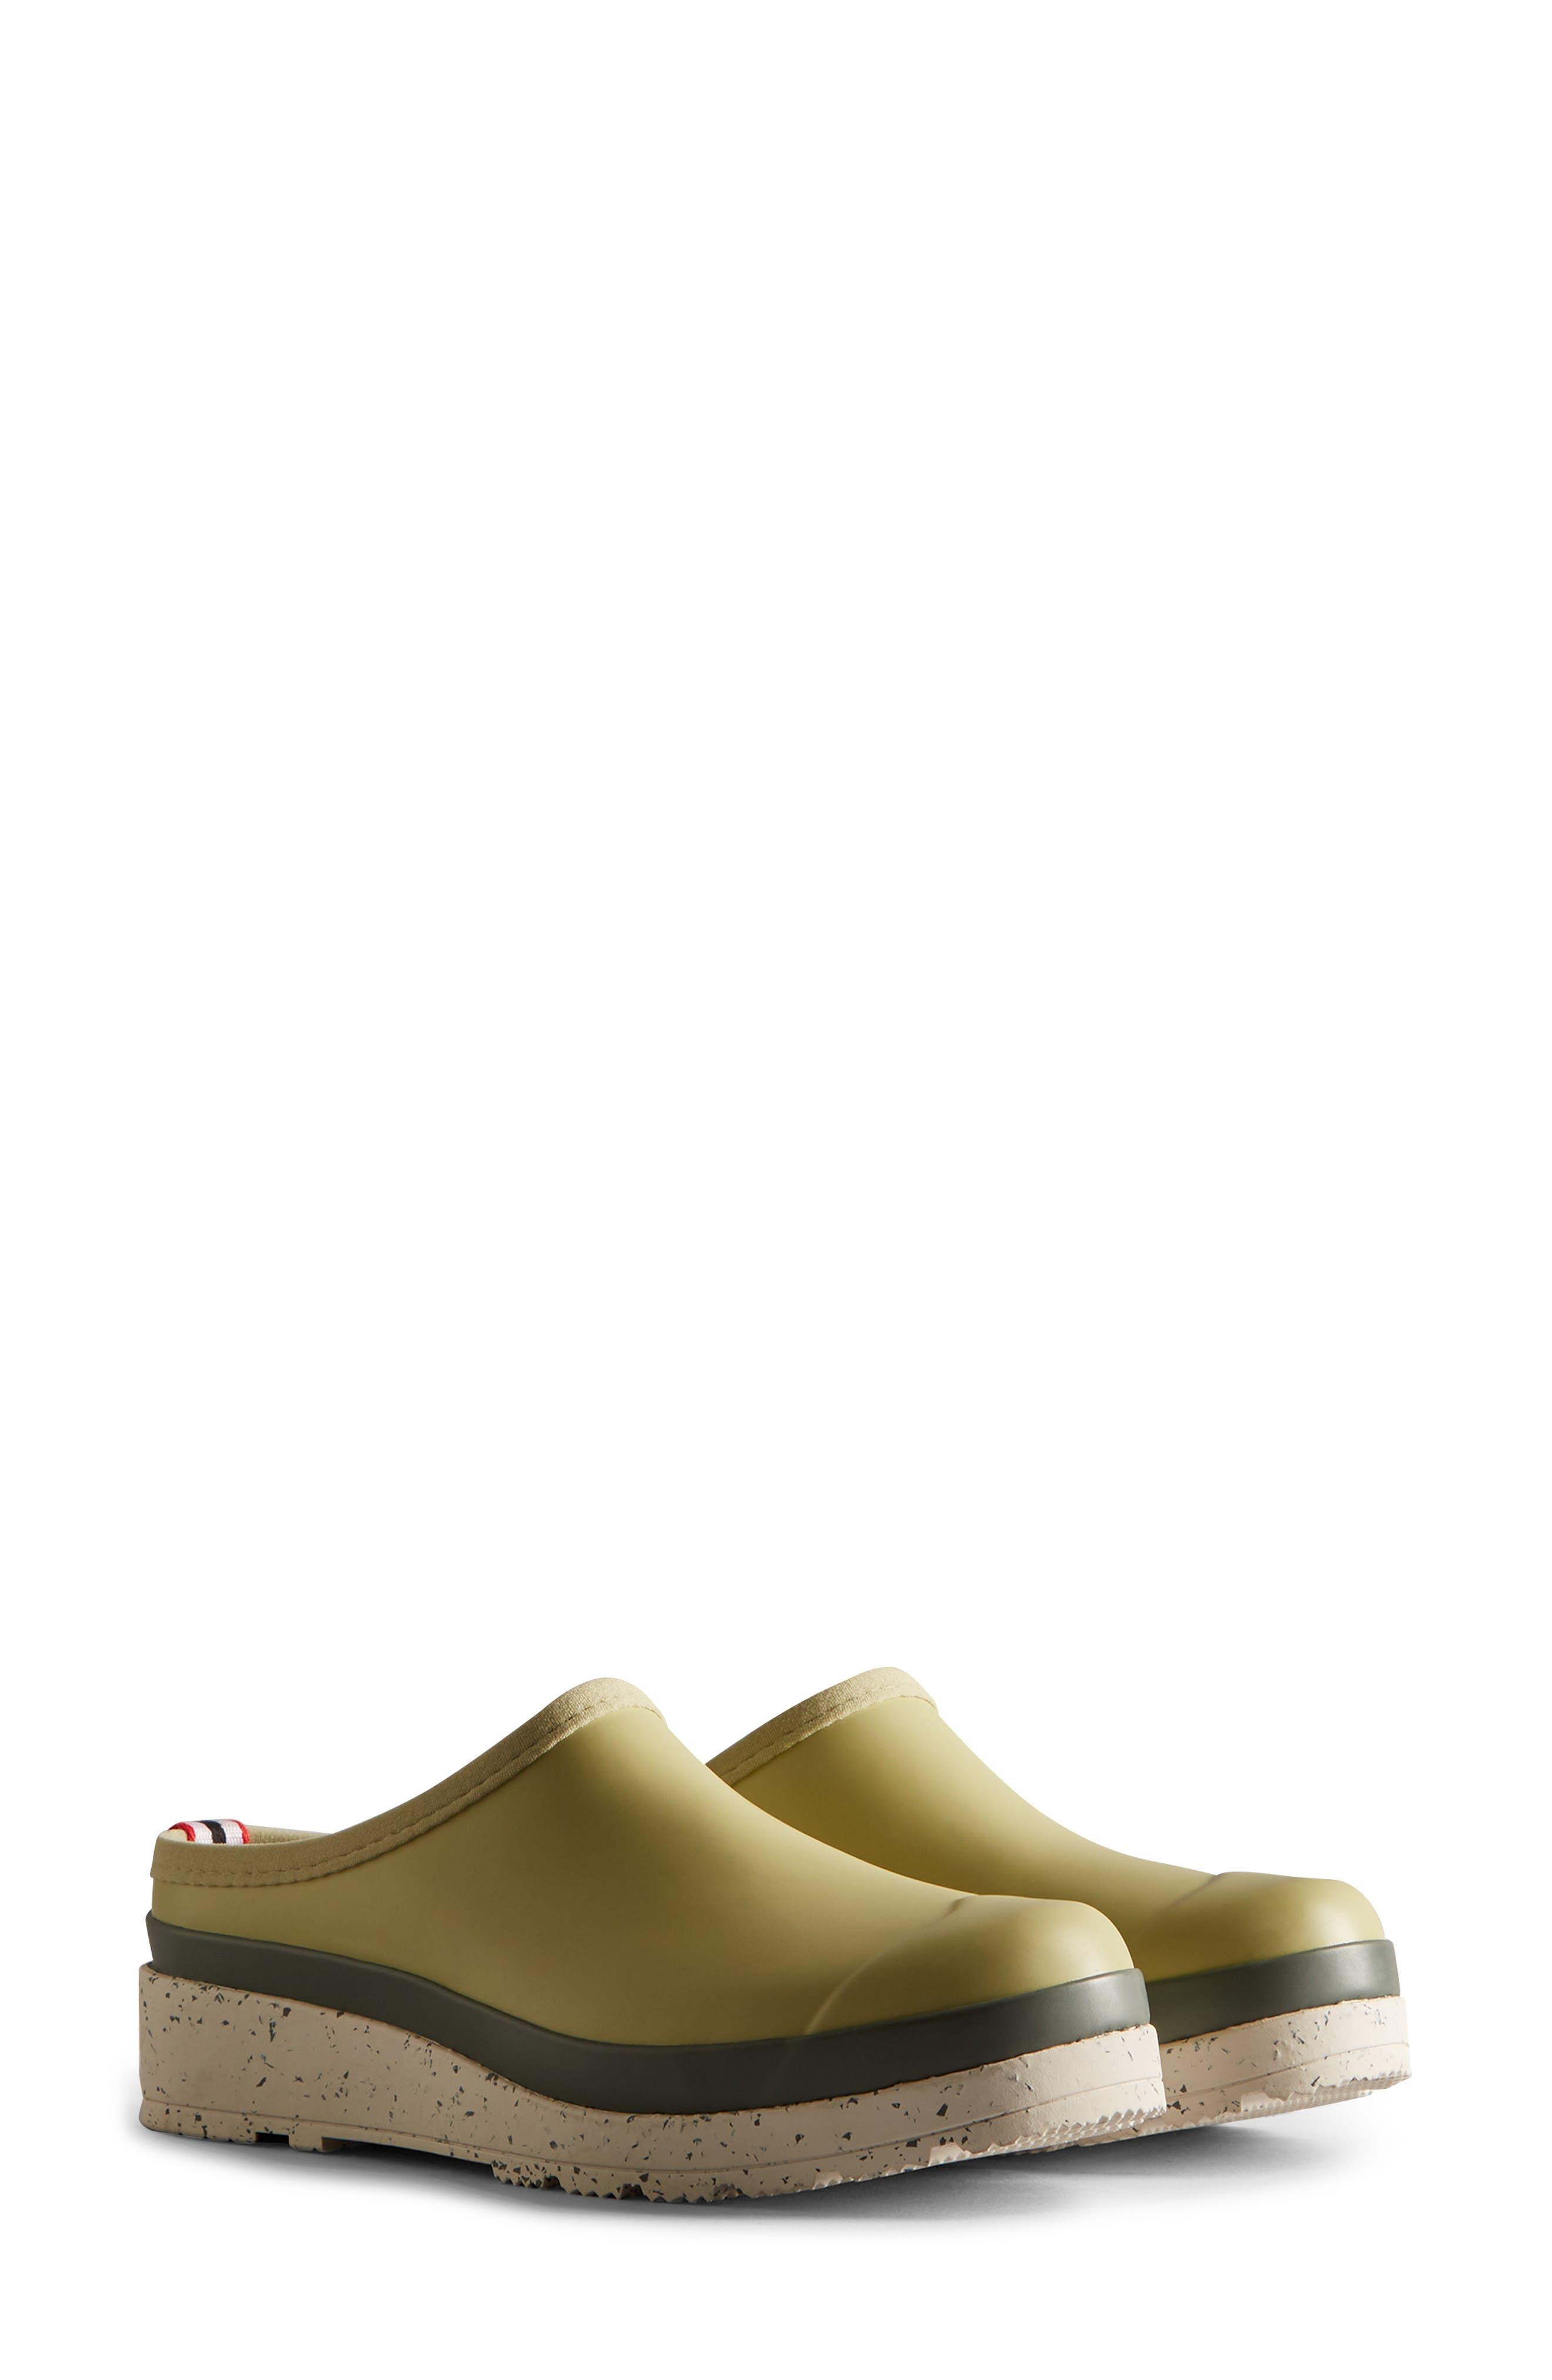 HUNTER Play Speckled Clog in Green | Lyst